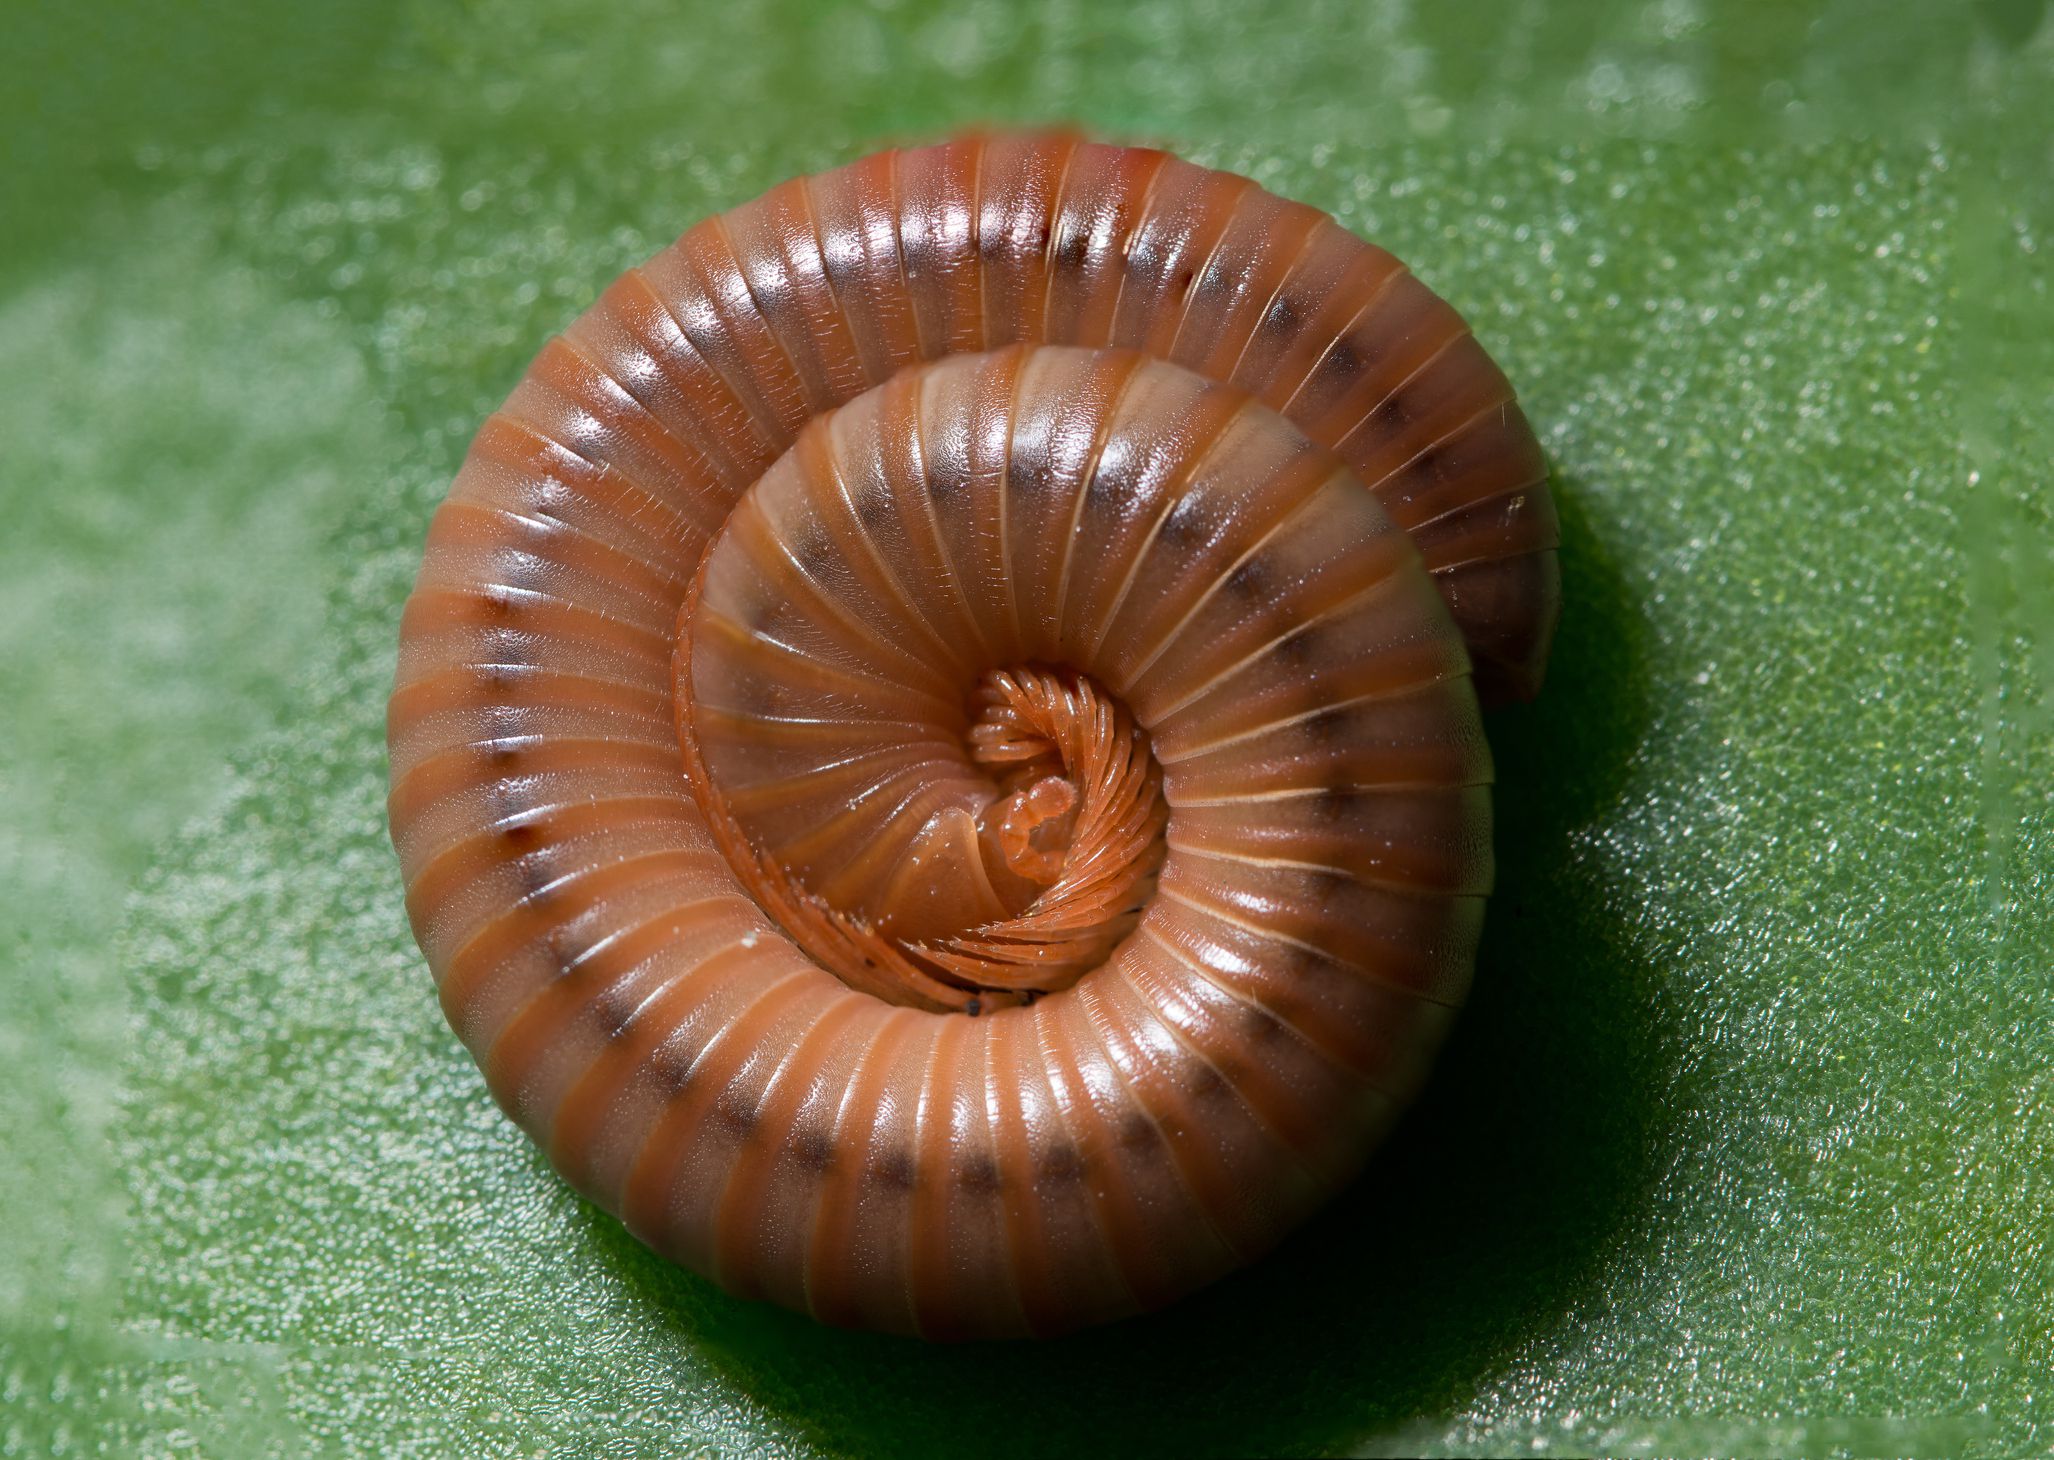 Habits and Traits of Millipedes, Class Diplopoda